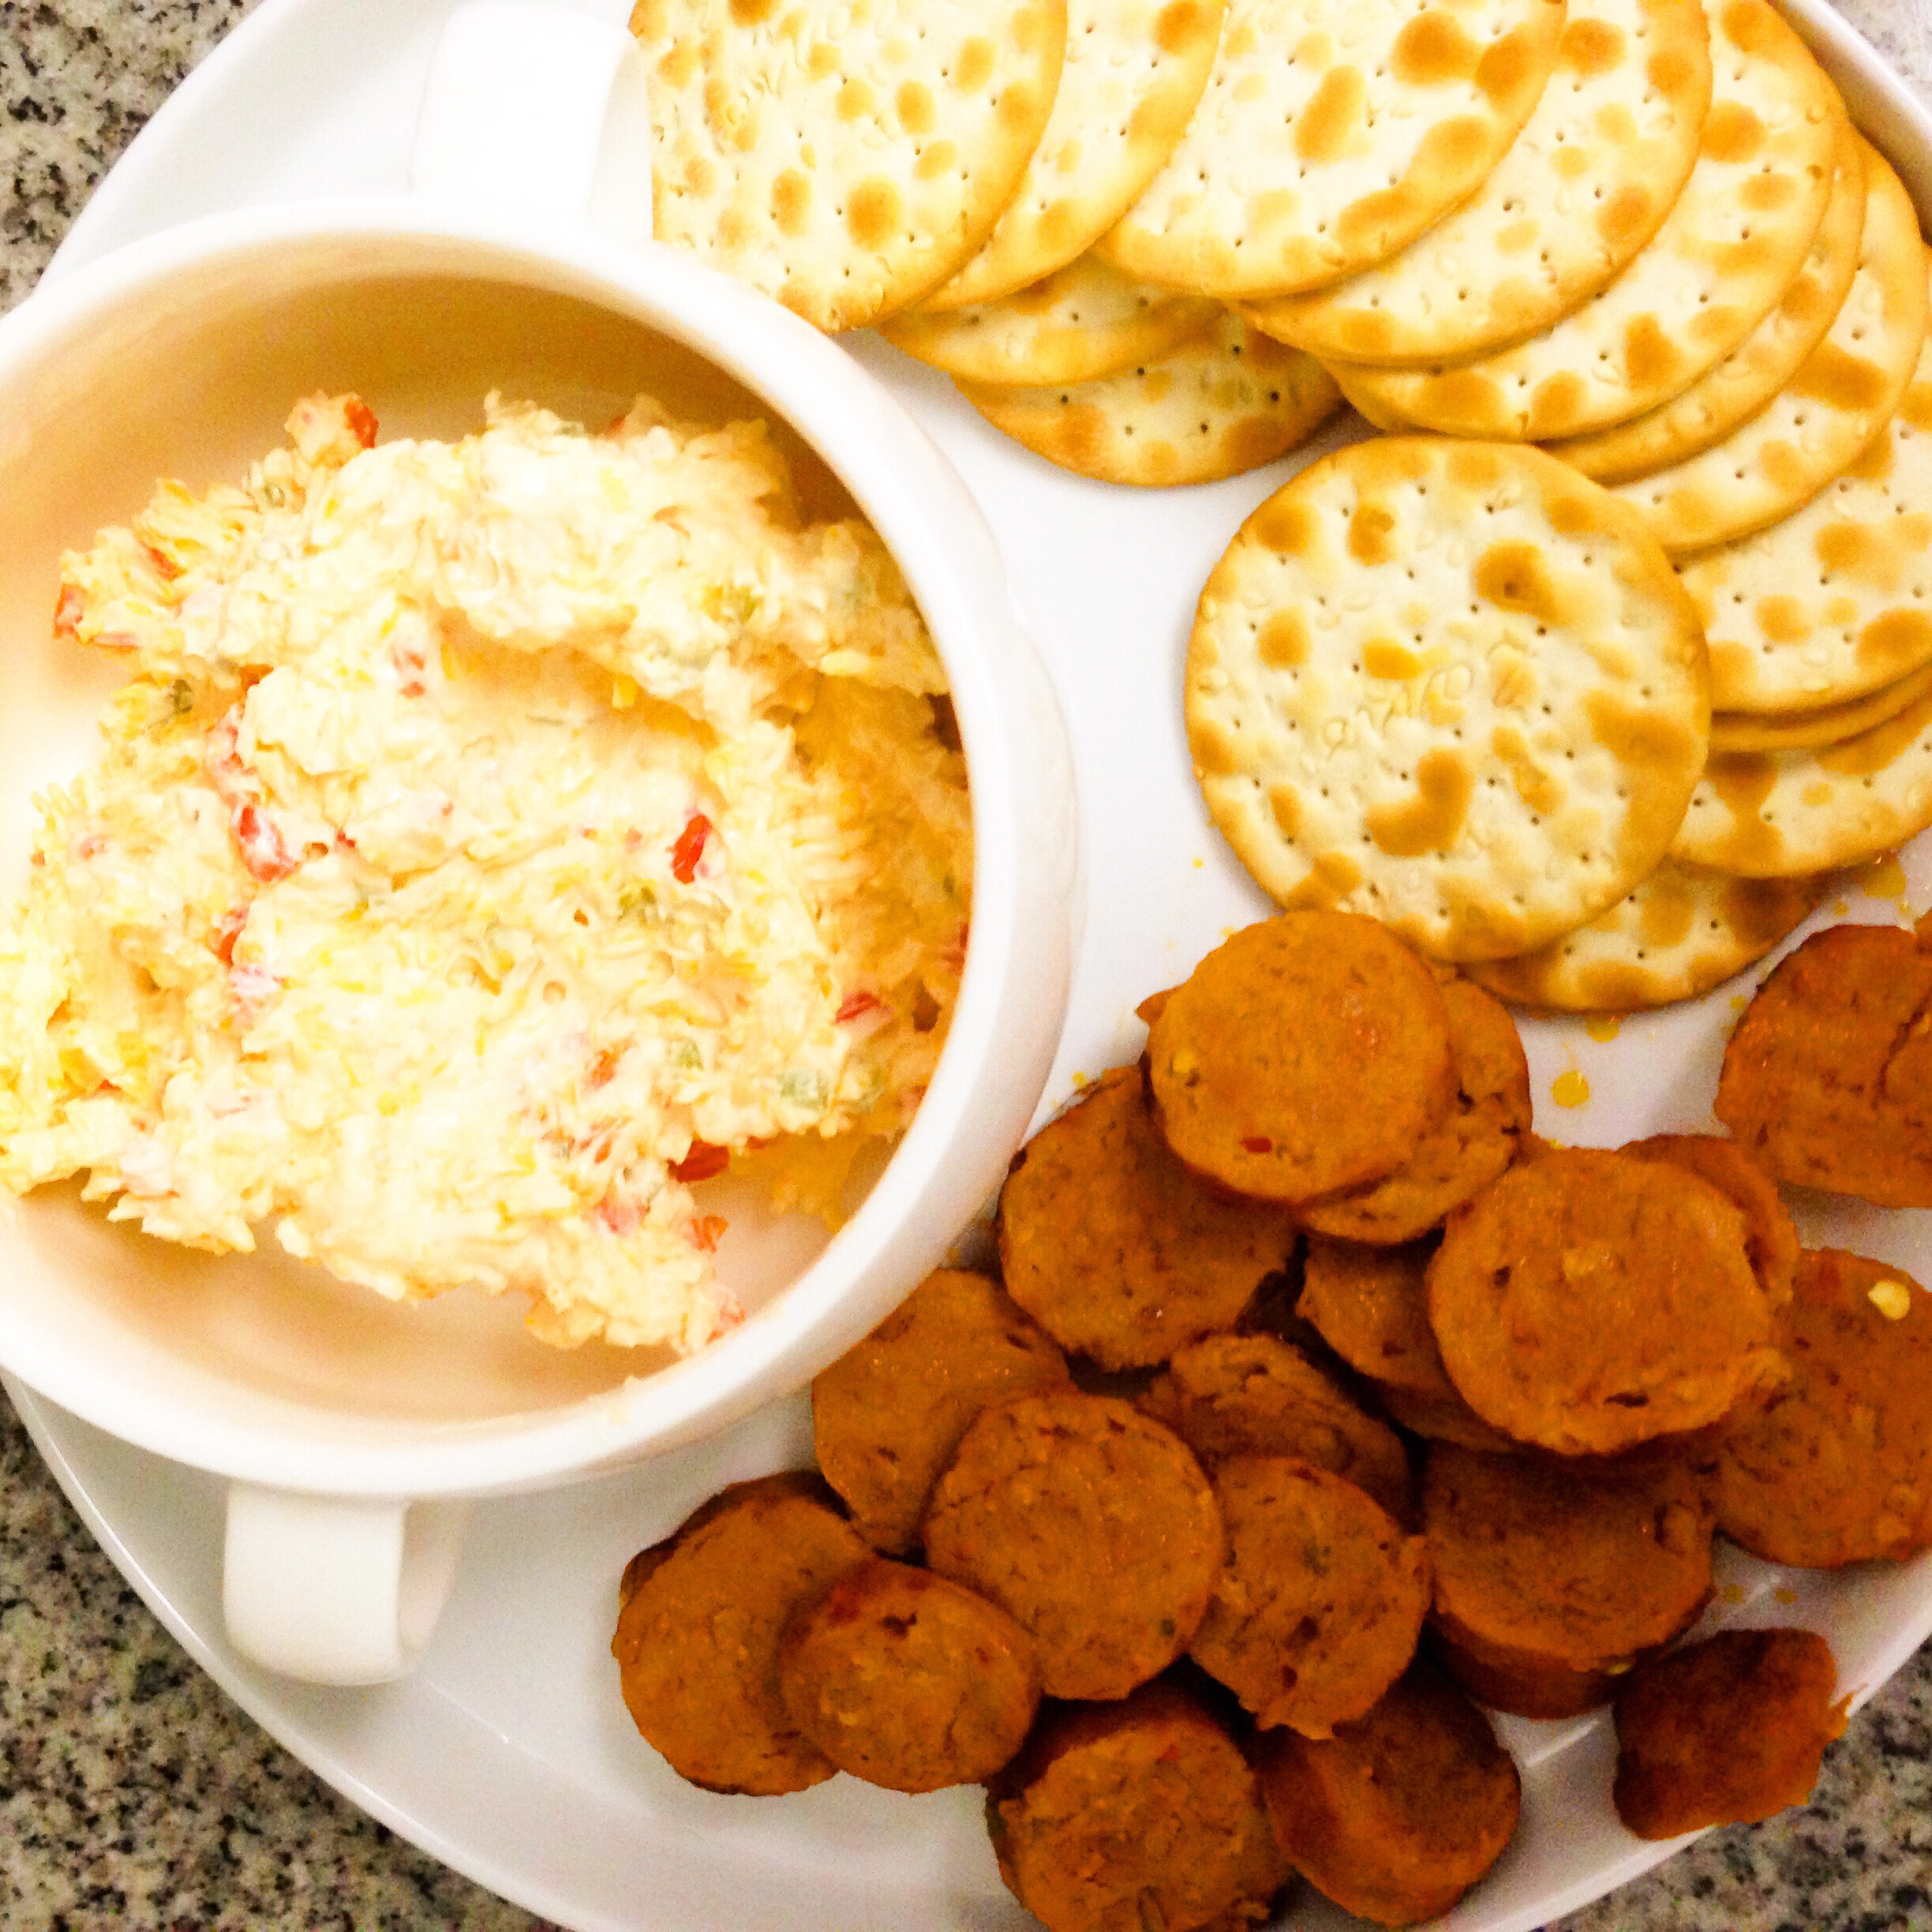 pimento-cheese-and-sausage_t20_bk98Qp